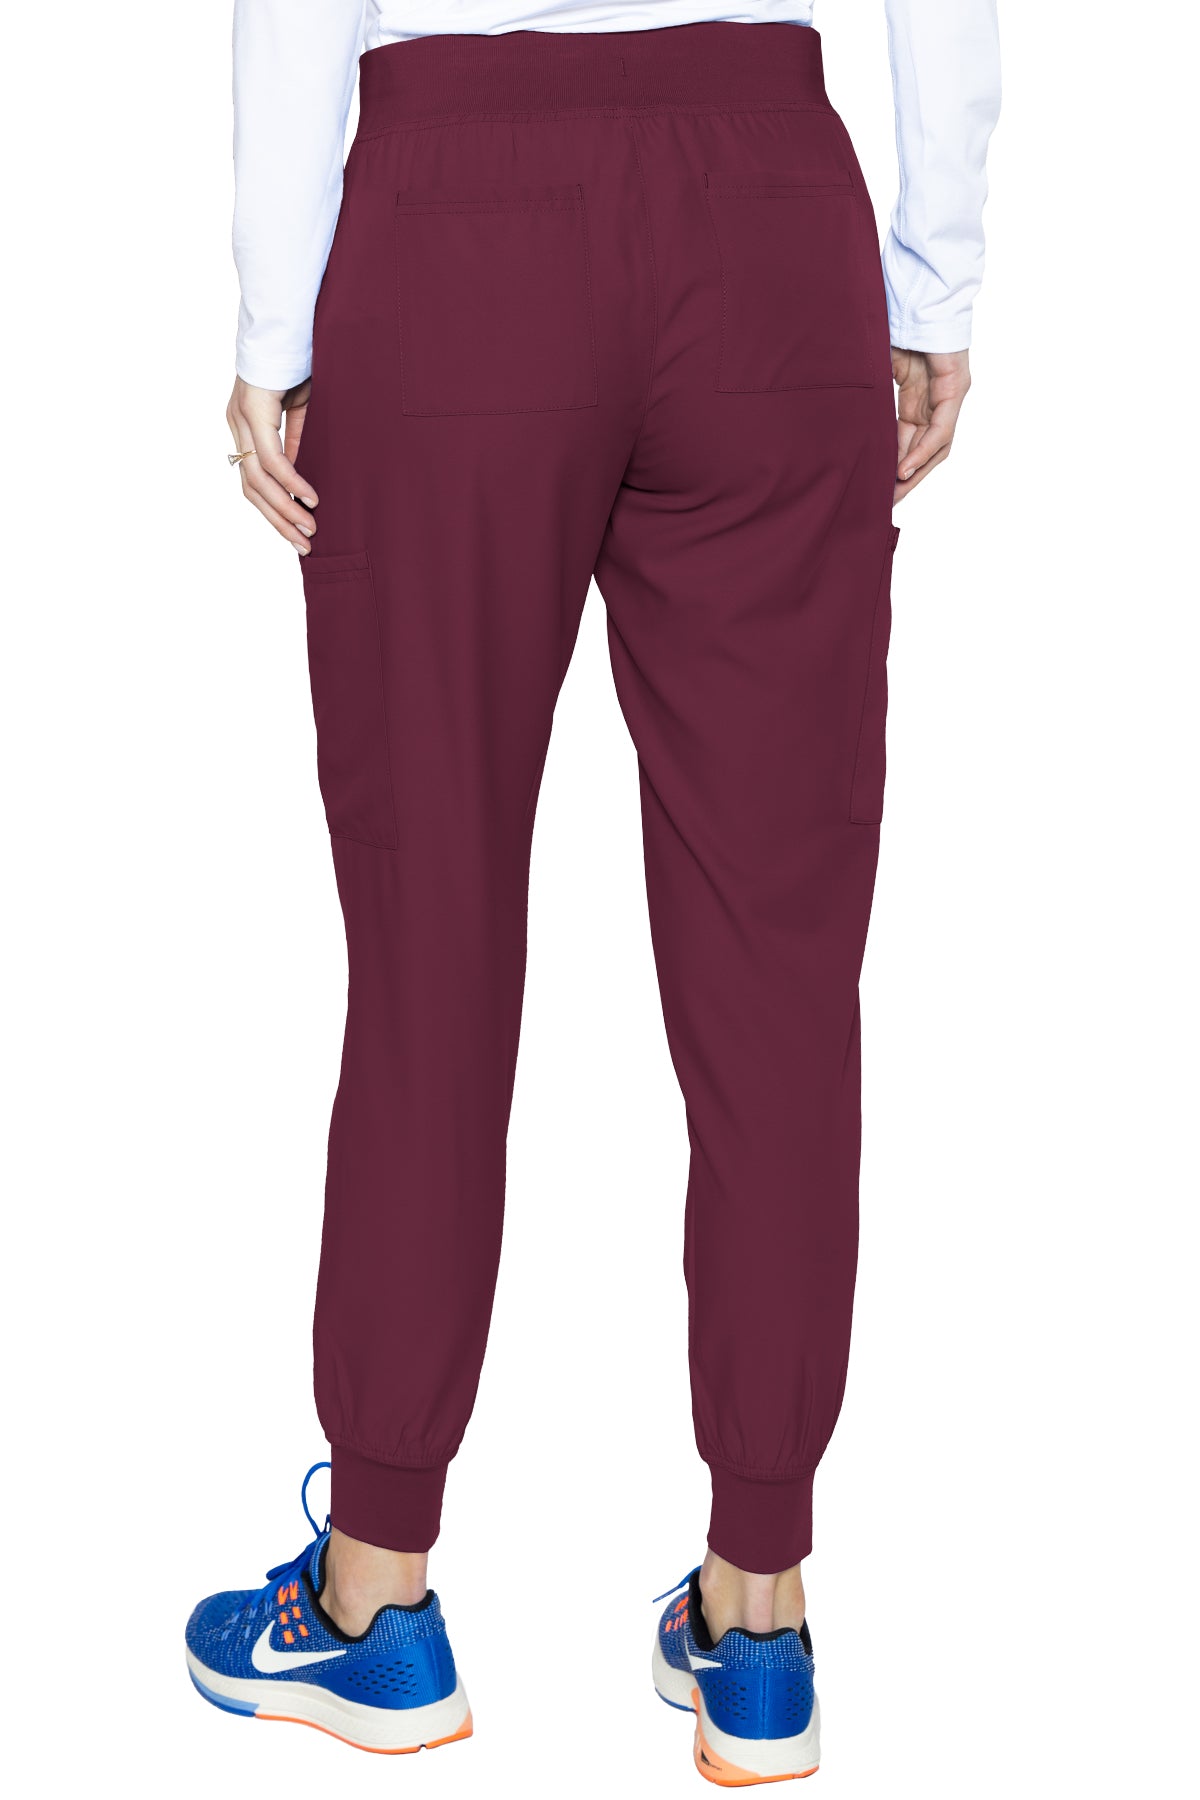 Med Couture 2711 Insight Jogger Pant Wine Back